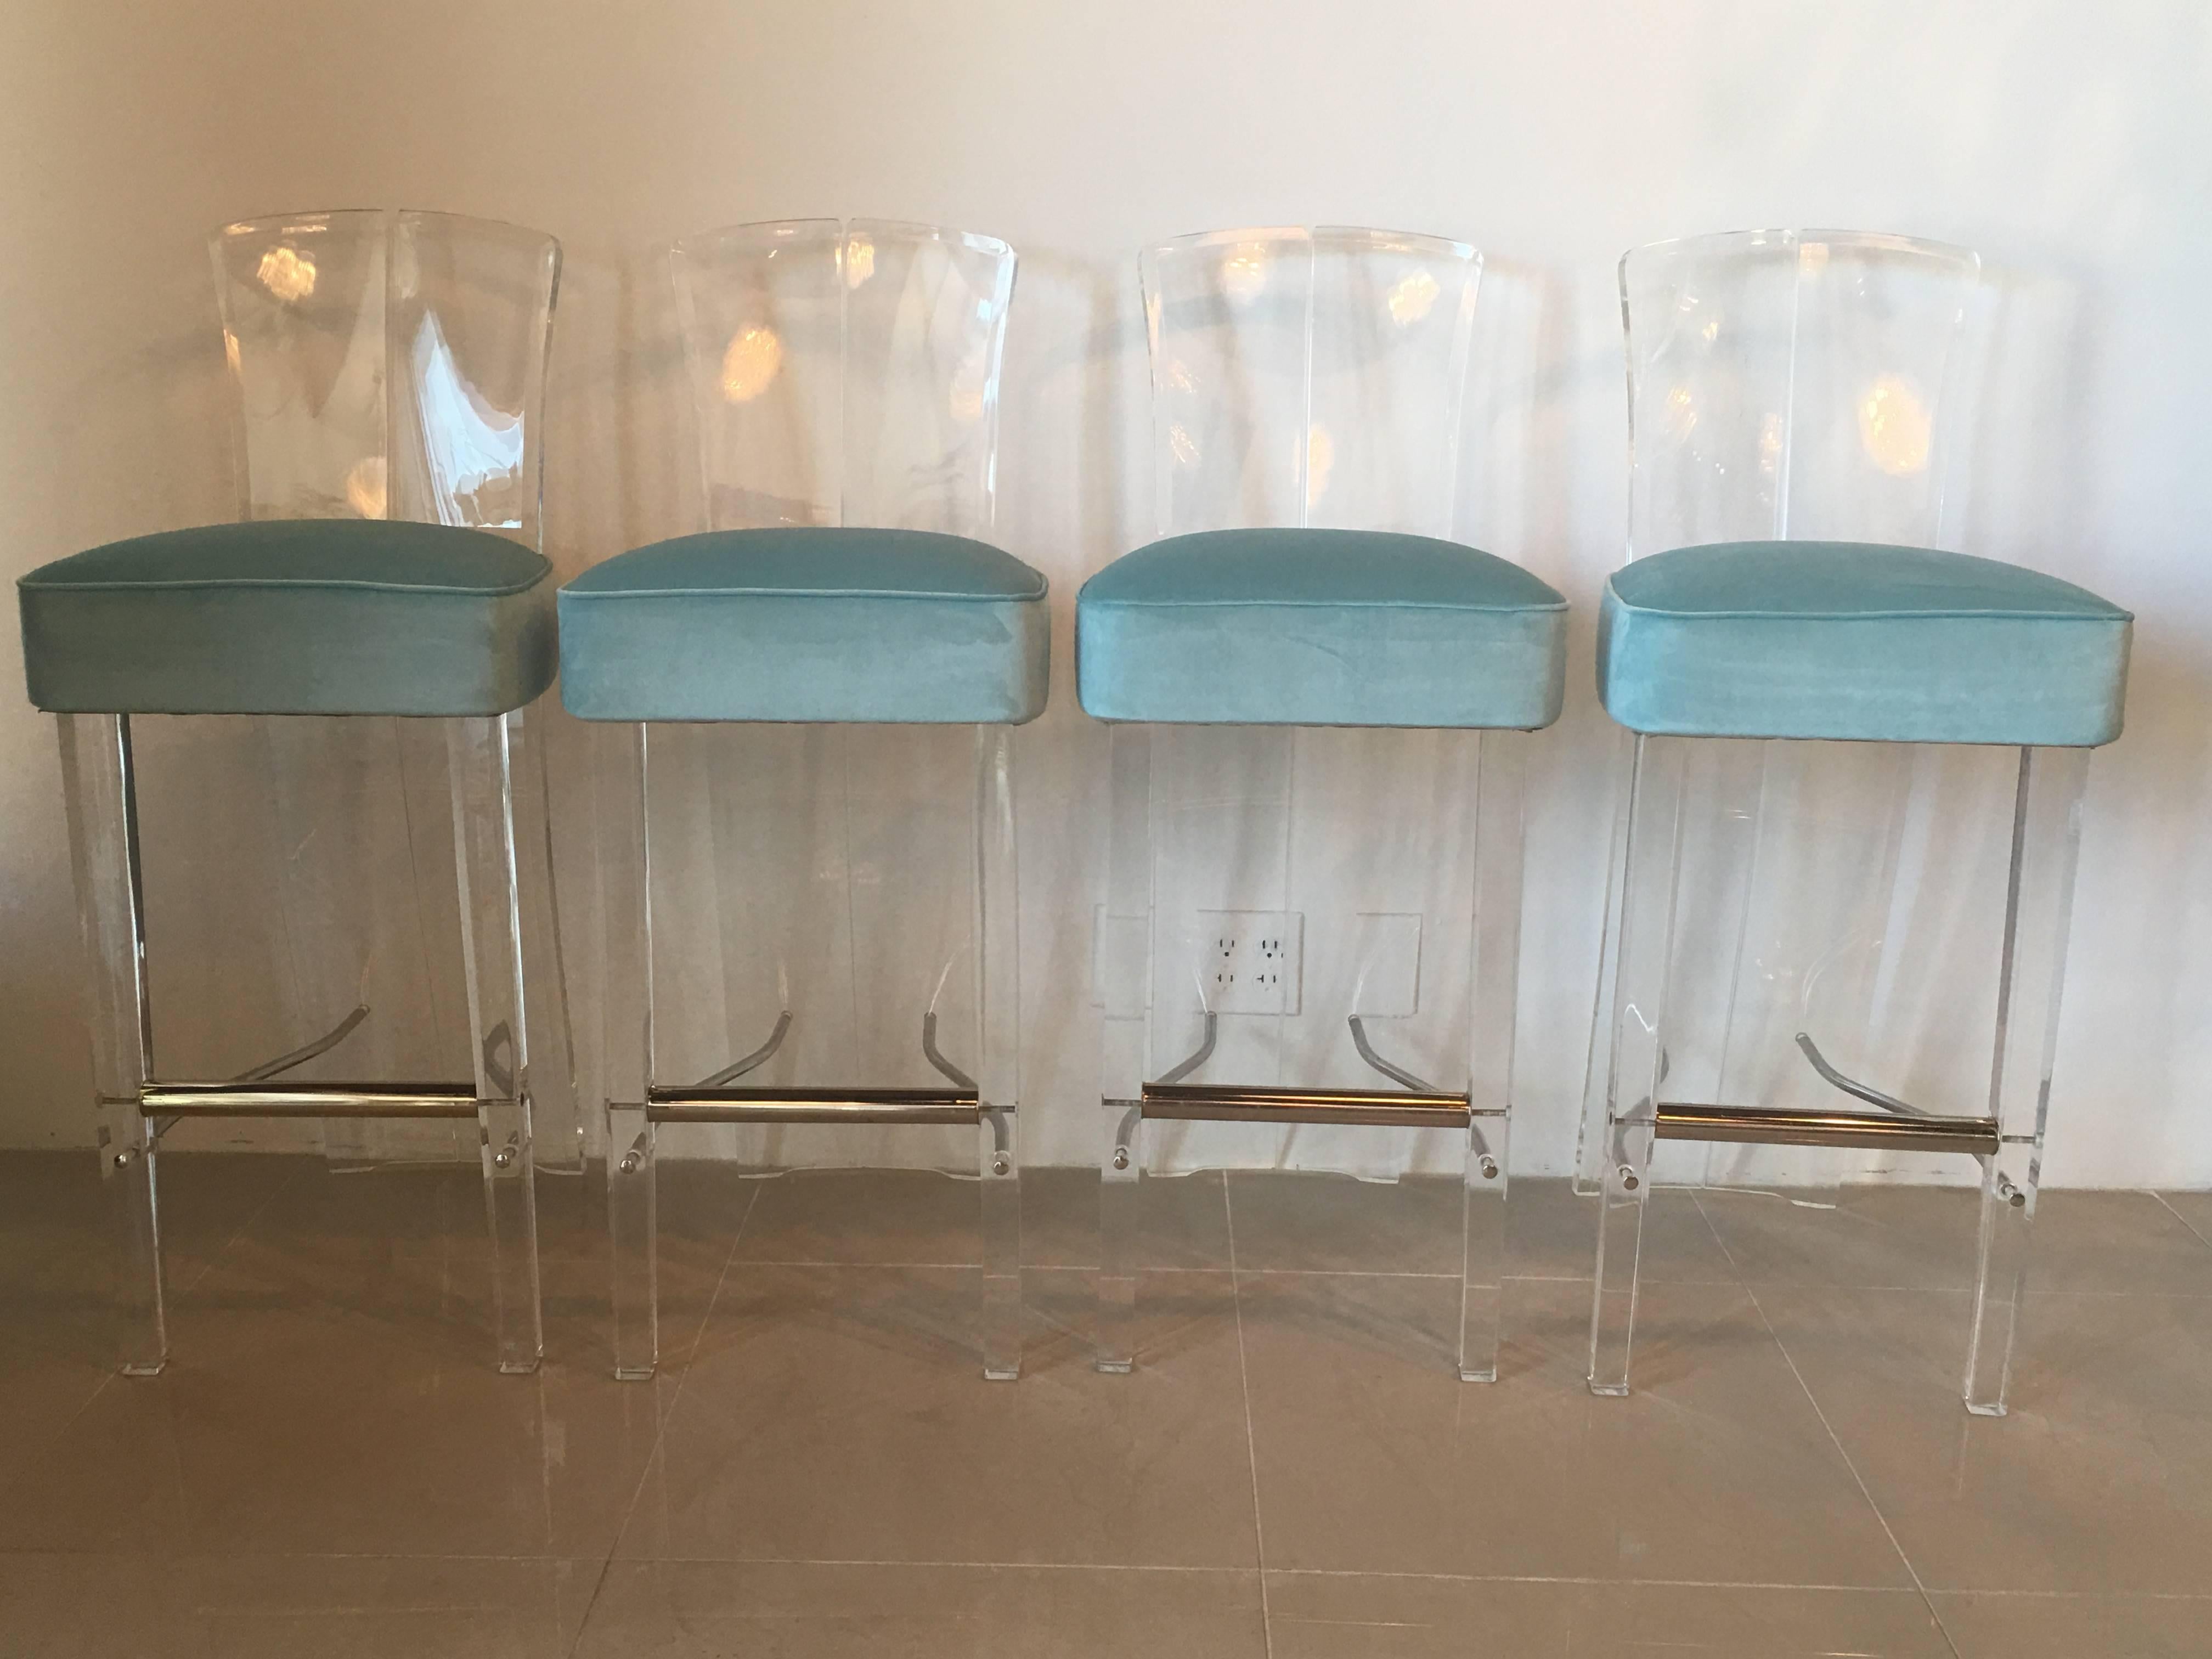 Set of four, Charles Hollis Jones style, amazing vintage Lucite and brass barstools, bar stools. The Lucite and brass have been polished and the blue velvet upholstery is new. There is some minor crazing around some of the screws and a few scratches